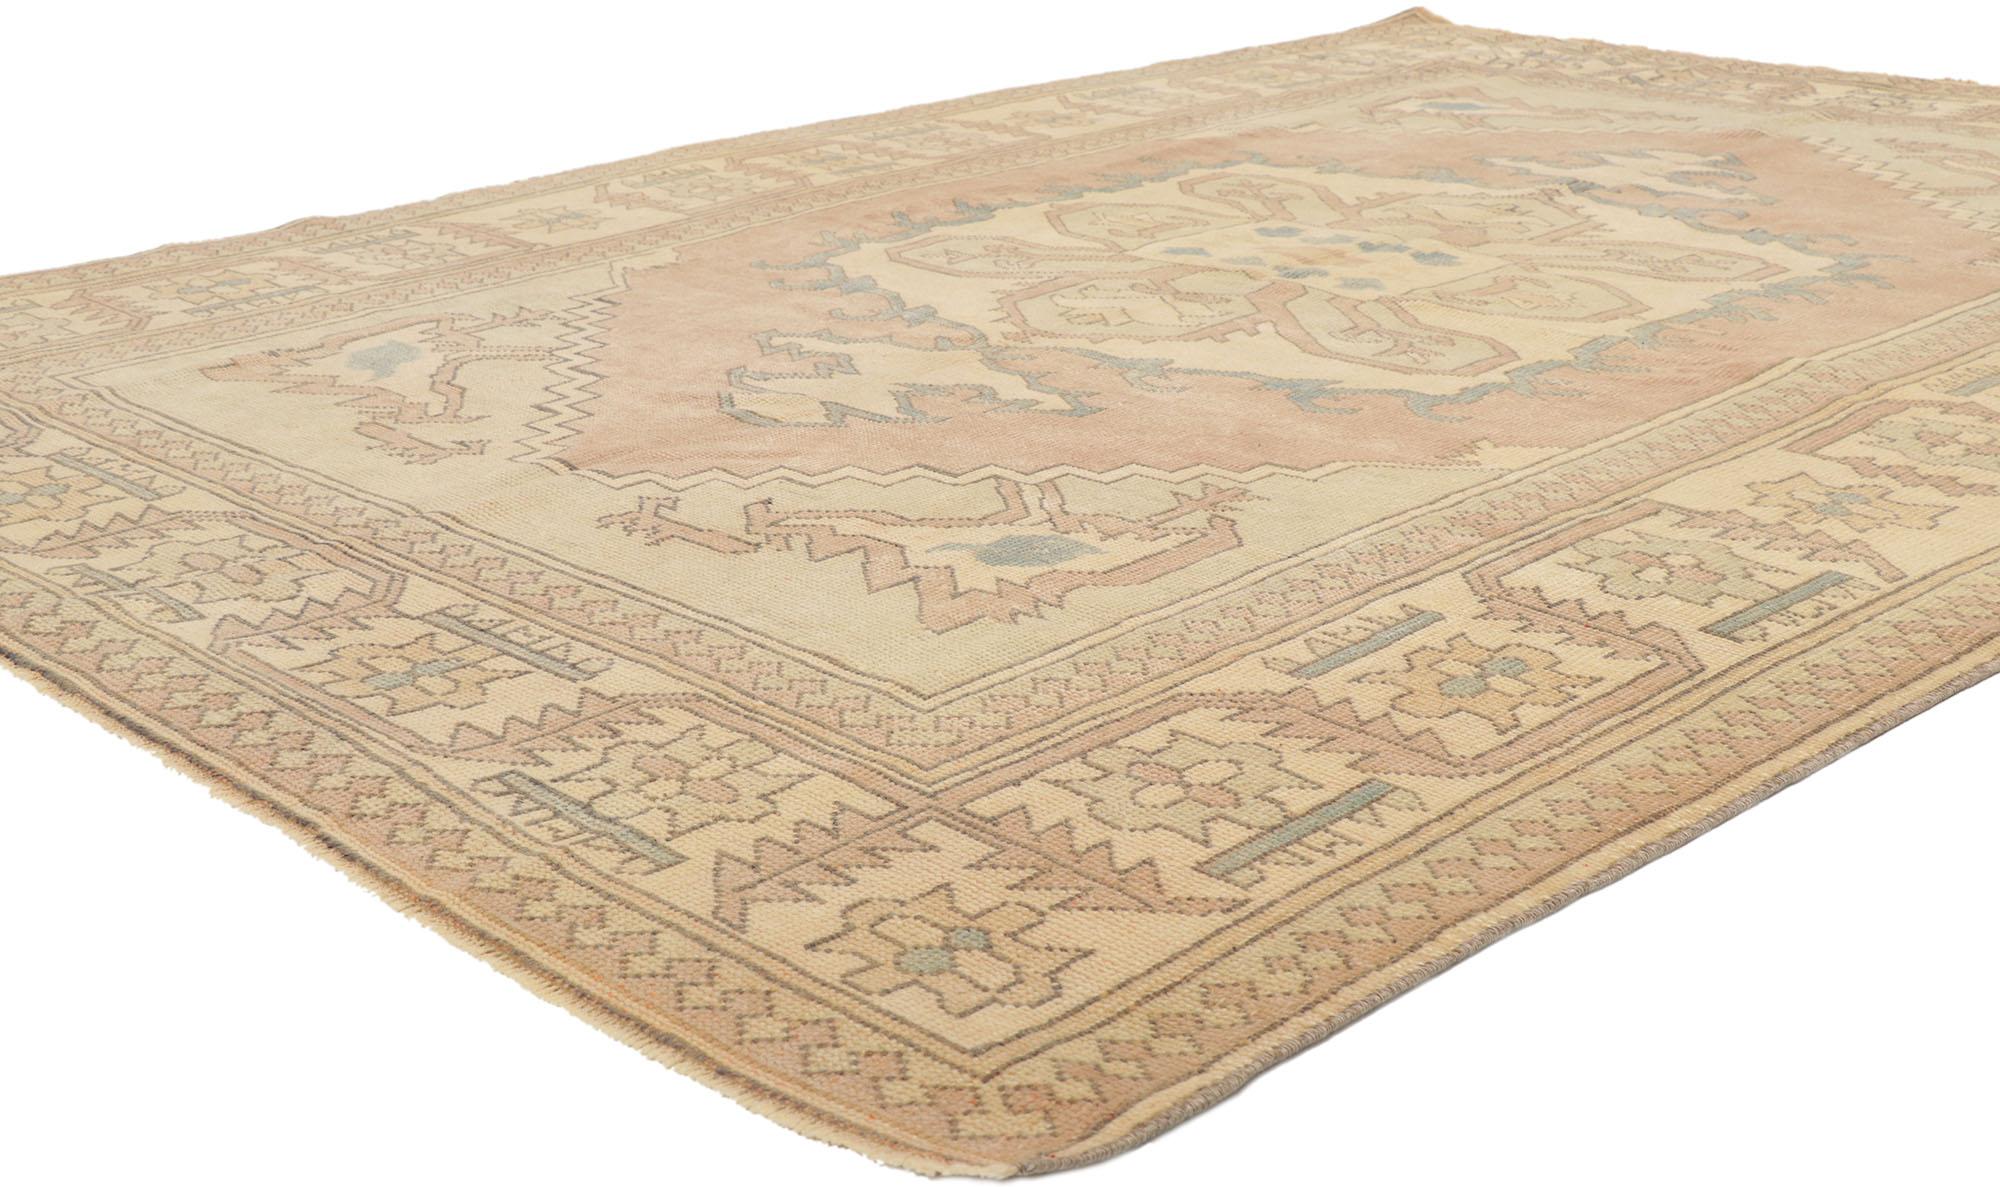 53724 Vintage Pink Oushak Turkish Rug, 5'10 x 8'02. 
Tribal enchantment meets modern bohemian in this hand knotted wool vintage Turkish Oushak rug. The abrashed cut-out field features a large botanical center medallion anchored with serrated